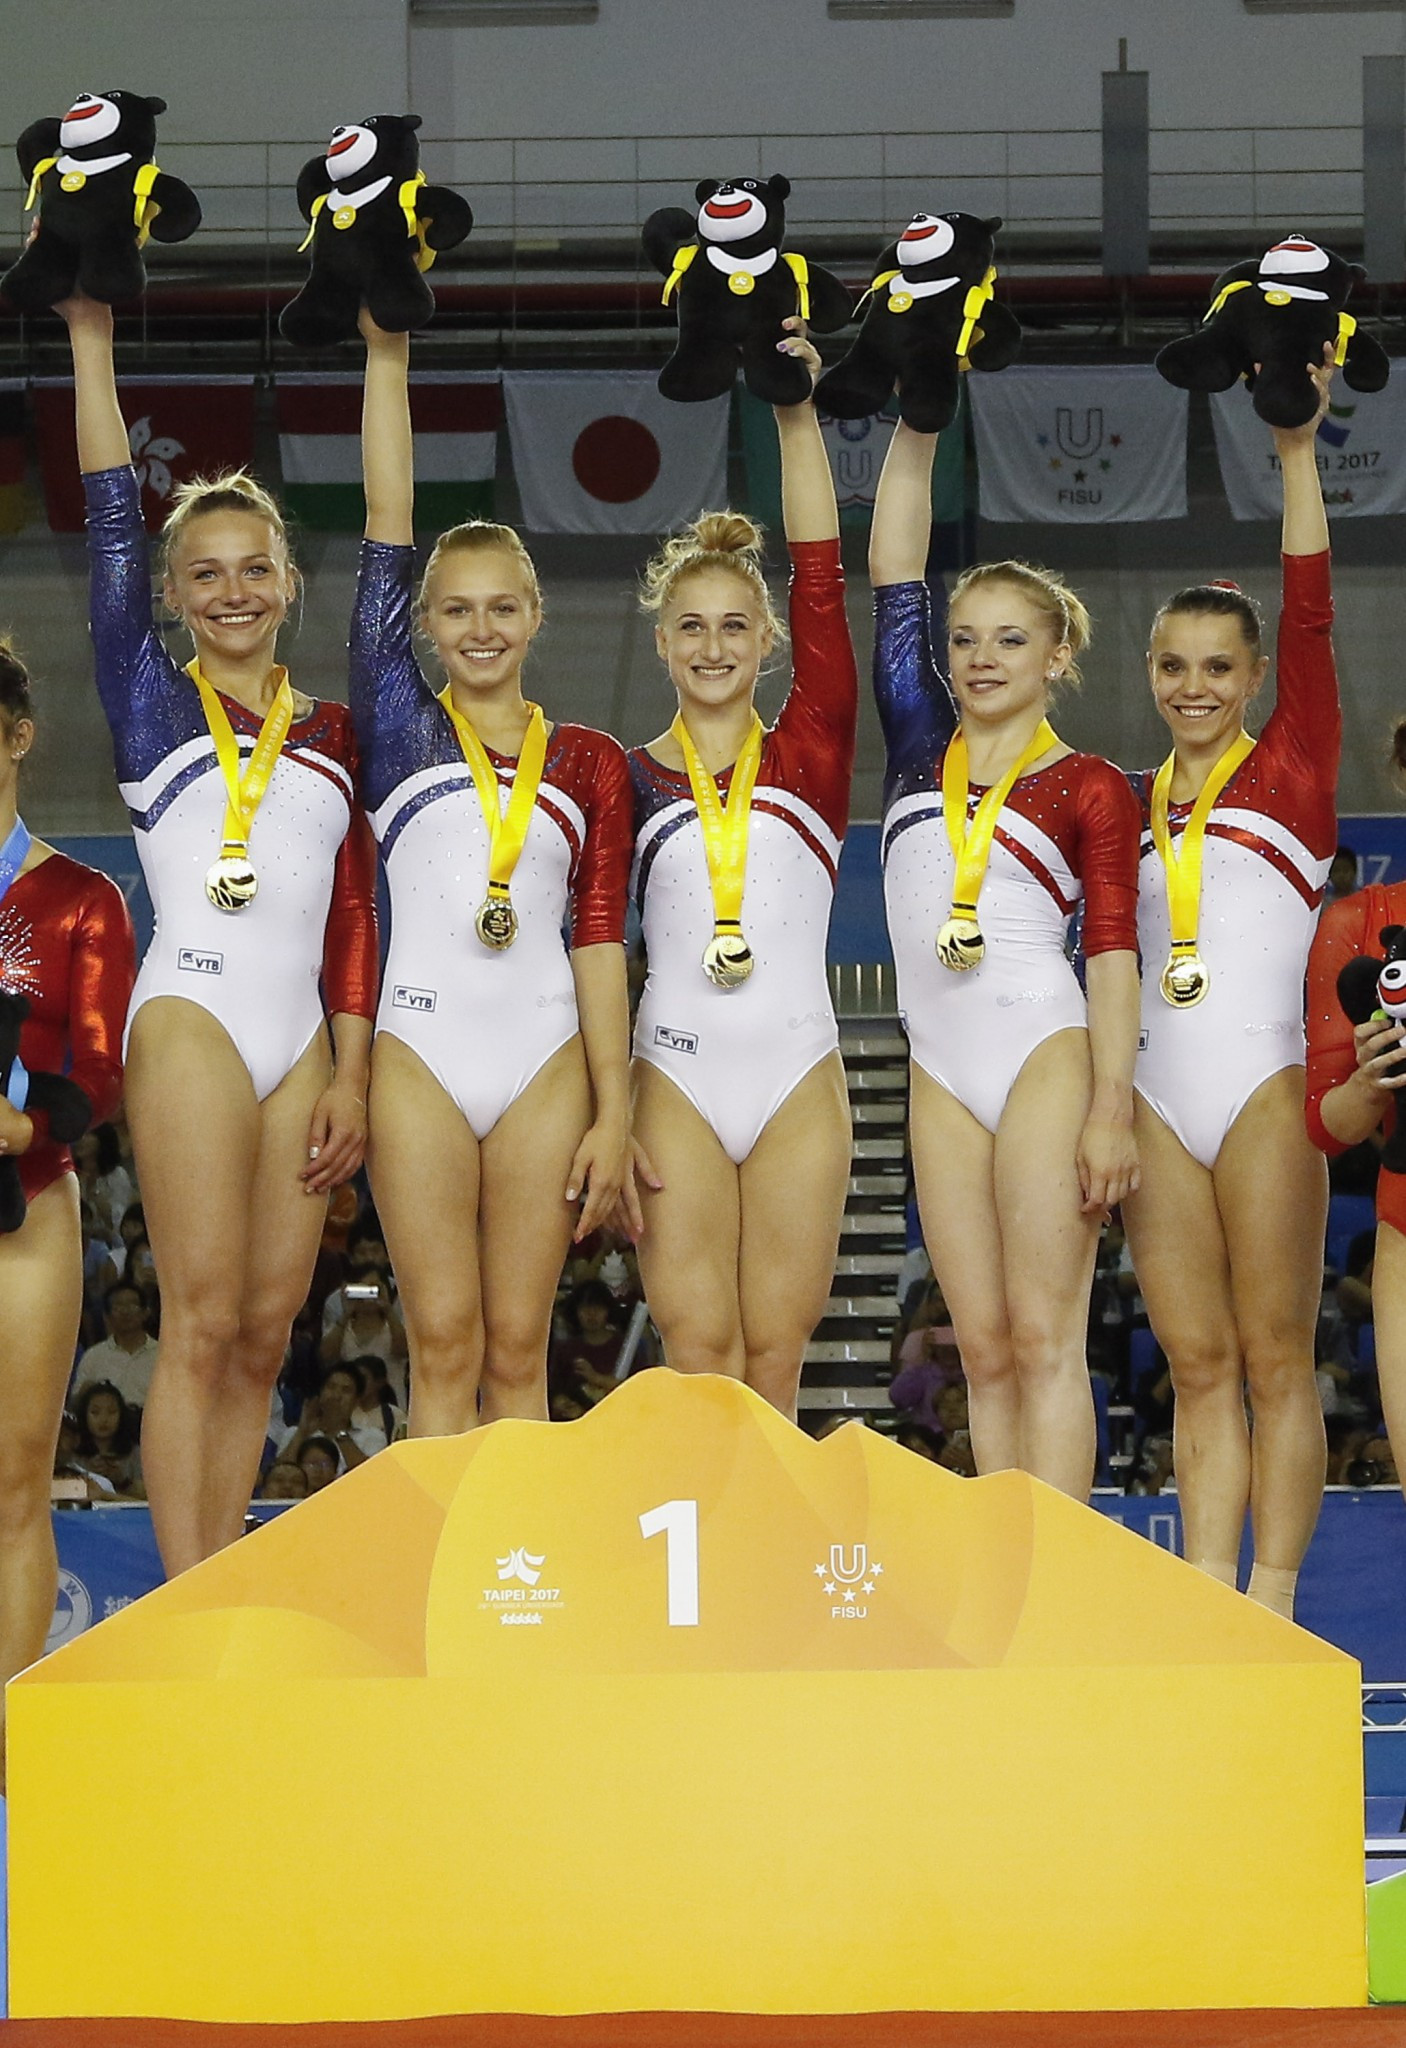 Russia secured gold in the women's gymnastics team final ©Taipei 2017